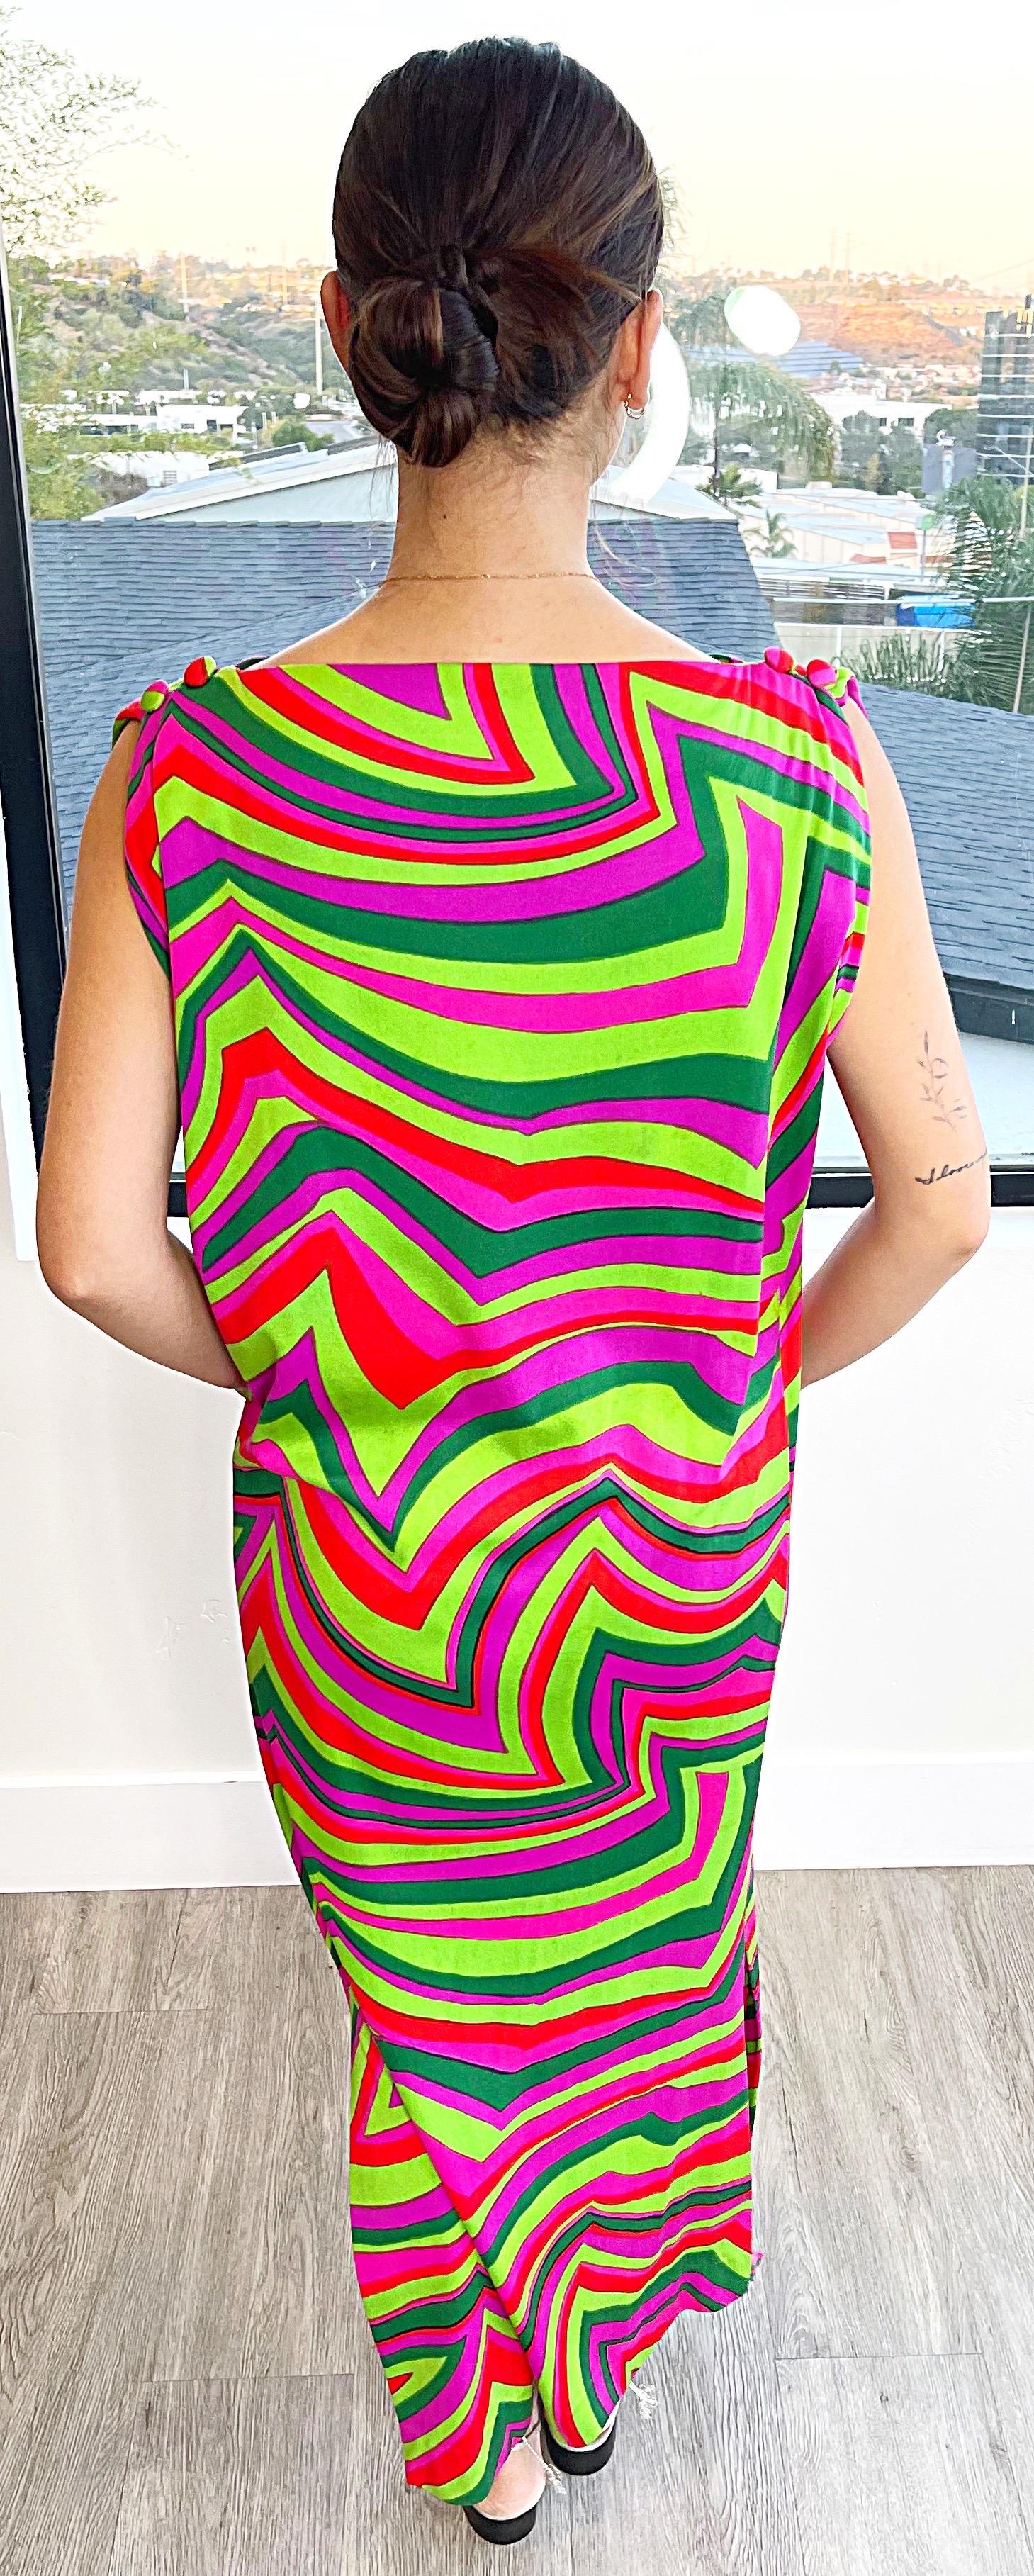 Women's Amazing 1970s Pucci Style Colorful Pink Green Jersey Vintage Caftan Maxi Dress For Sale